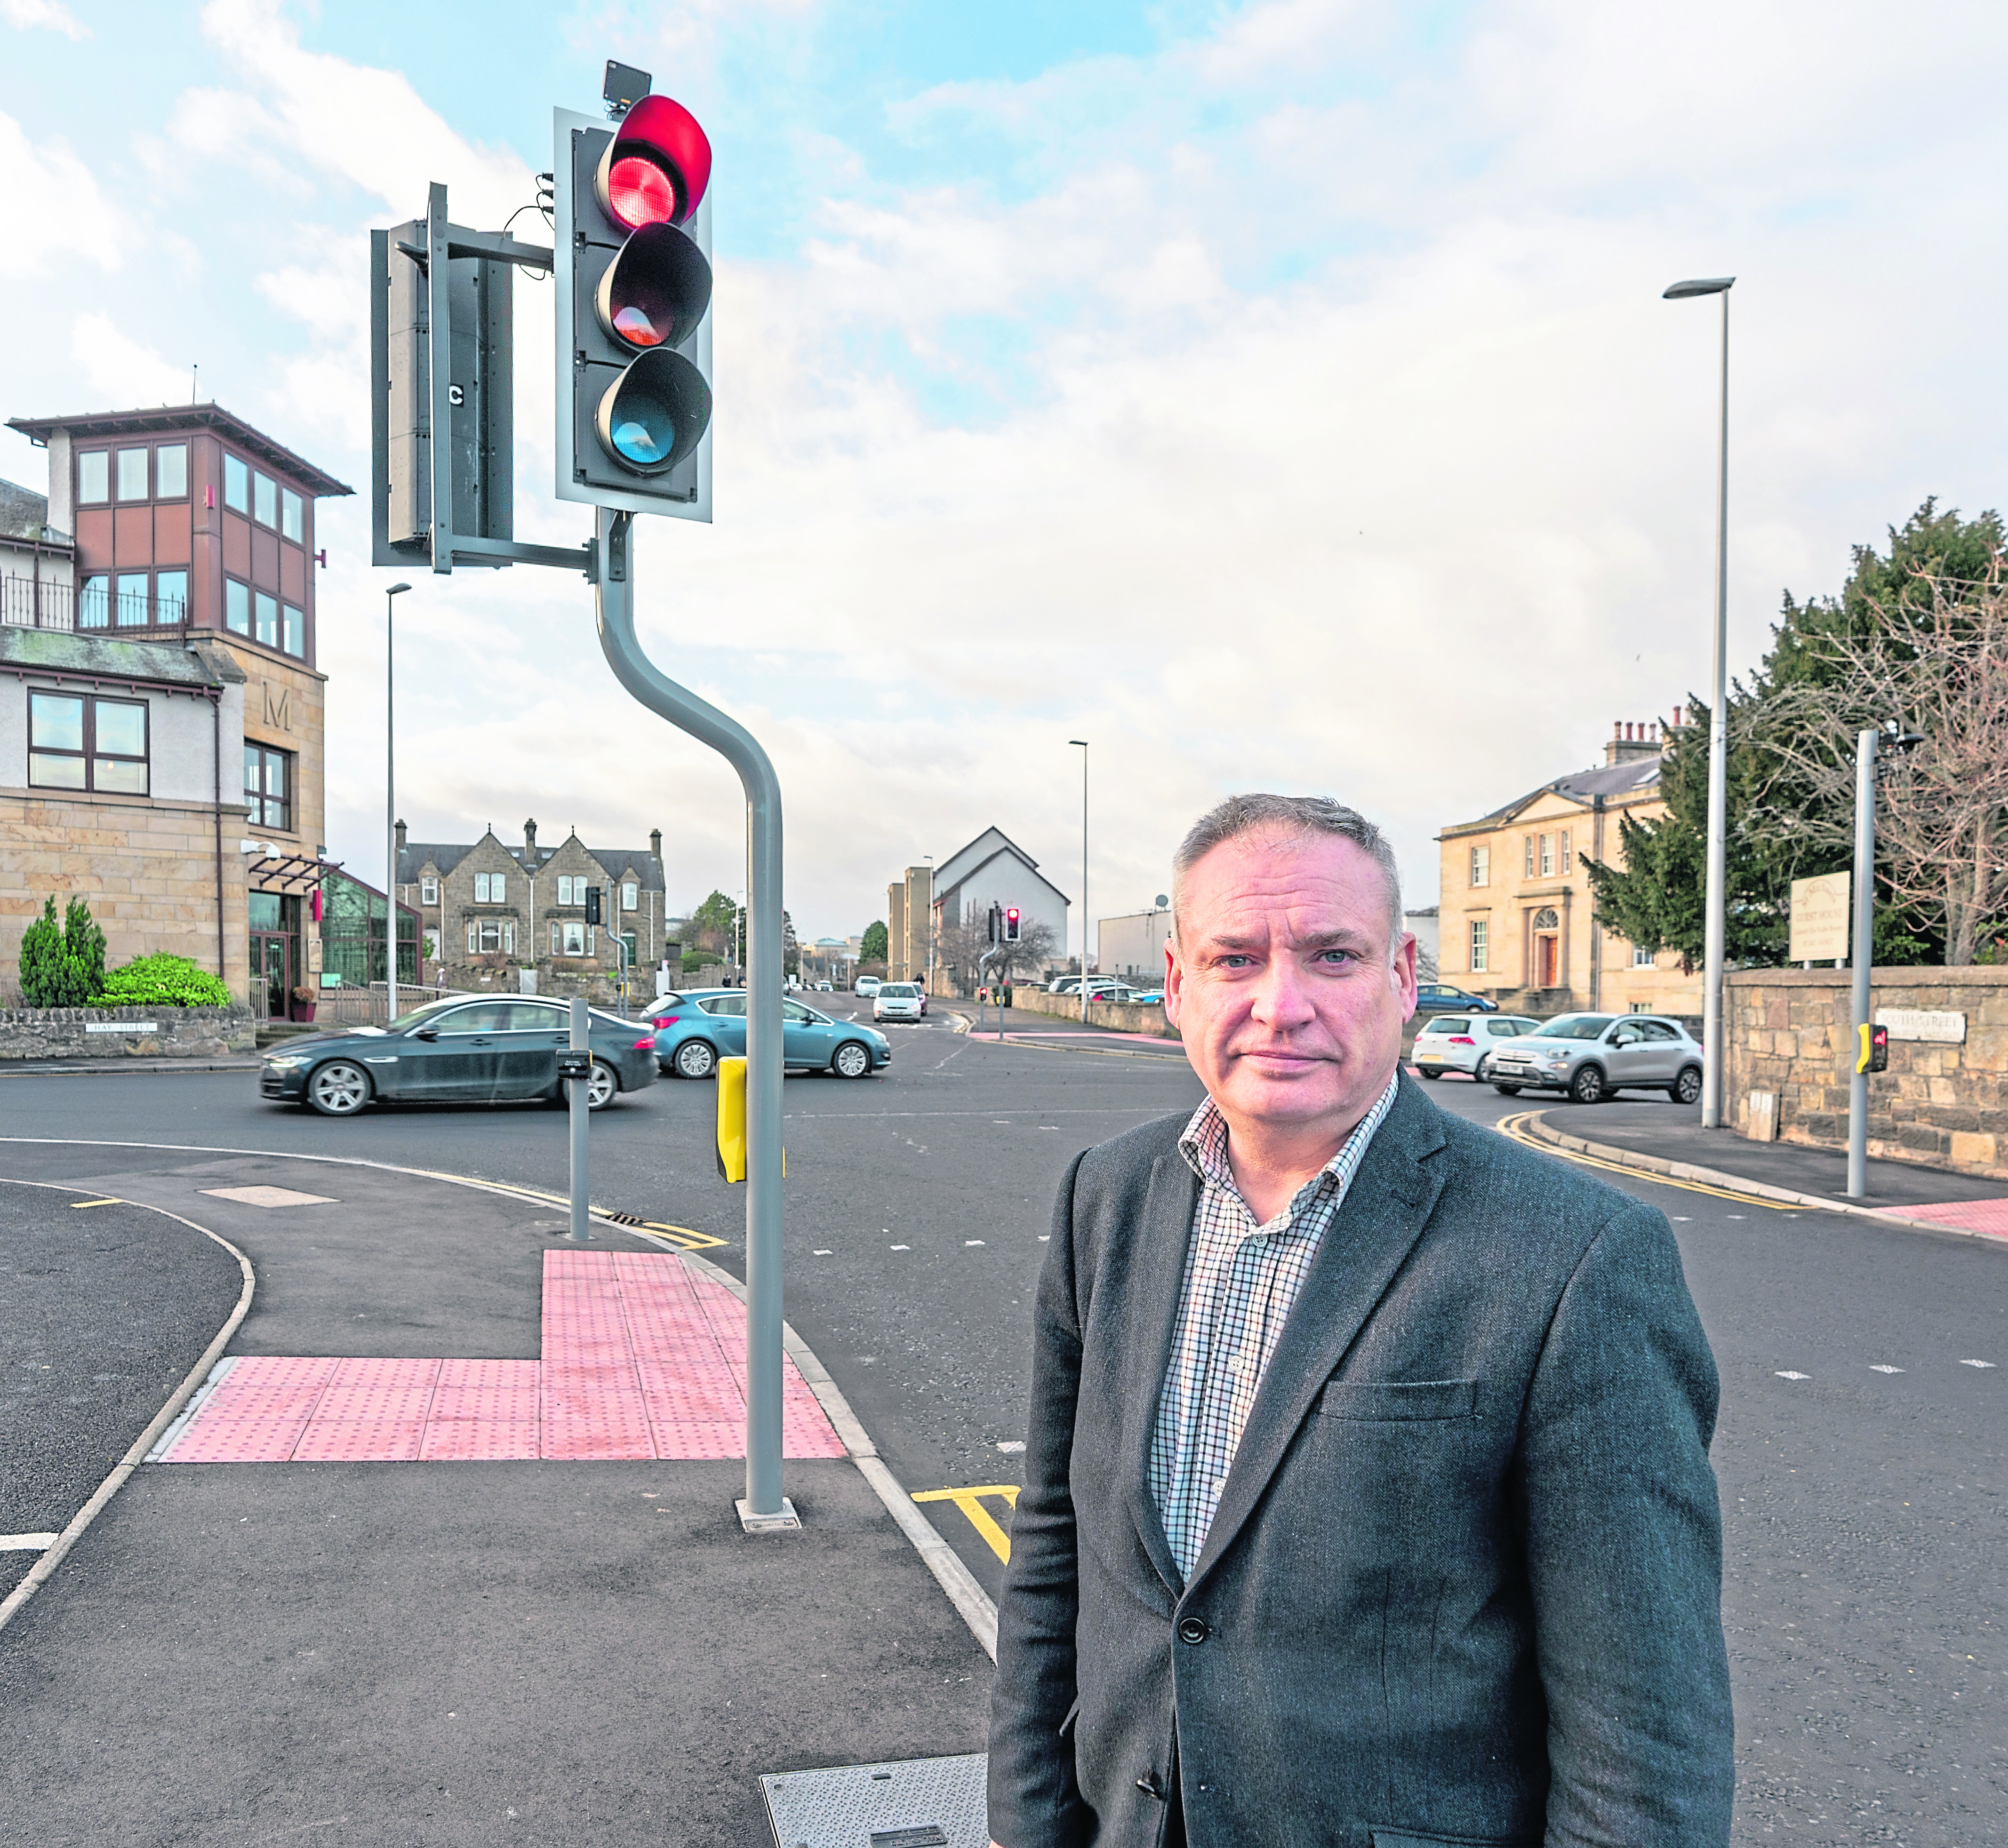 Richard Lochhead at the Traffic Light junction of South Street and A941 Northfield Terrace, Elgin, Moray, Scotland.